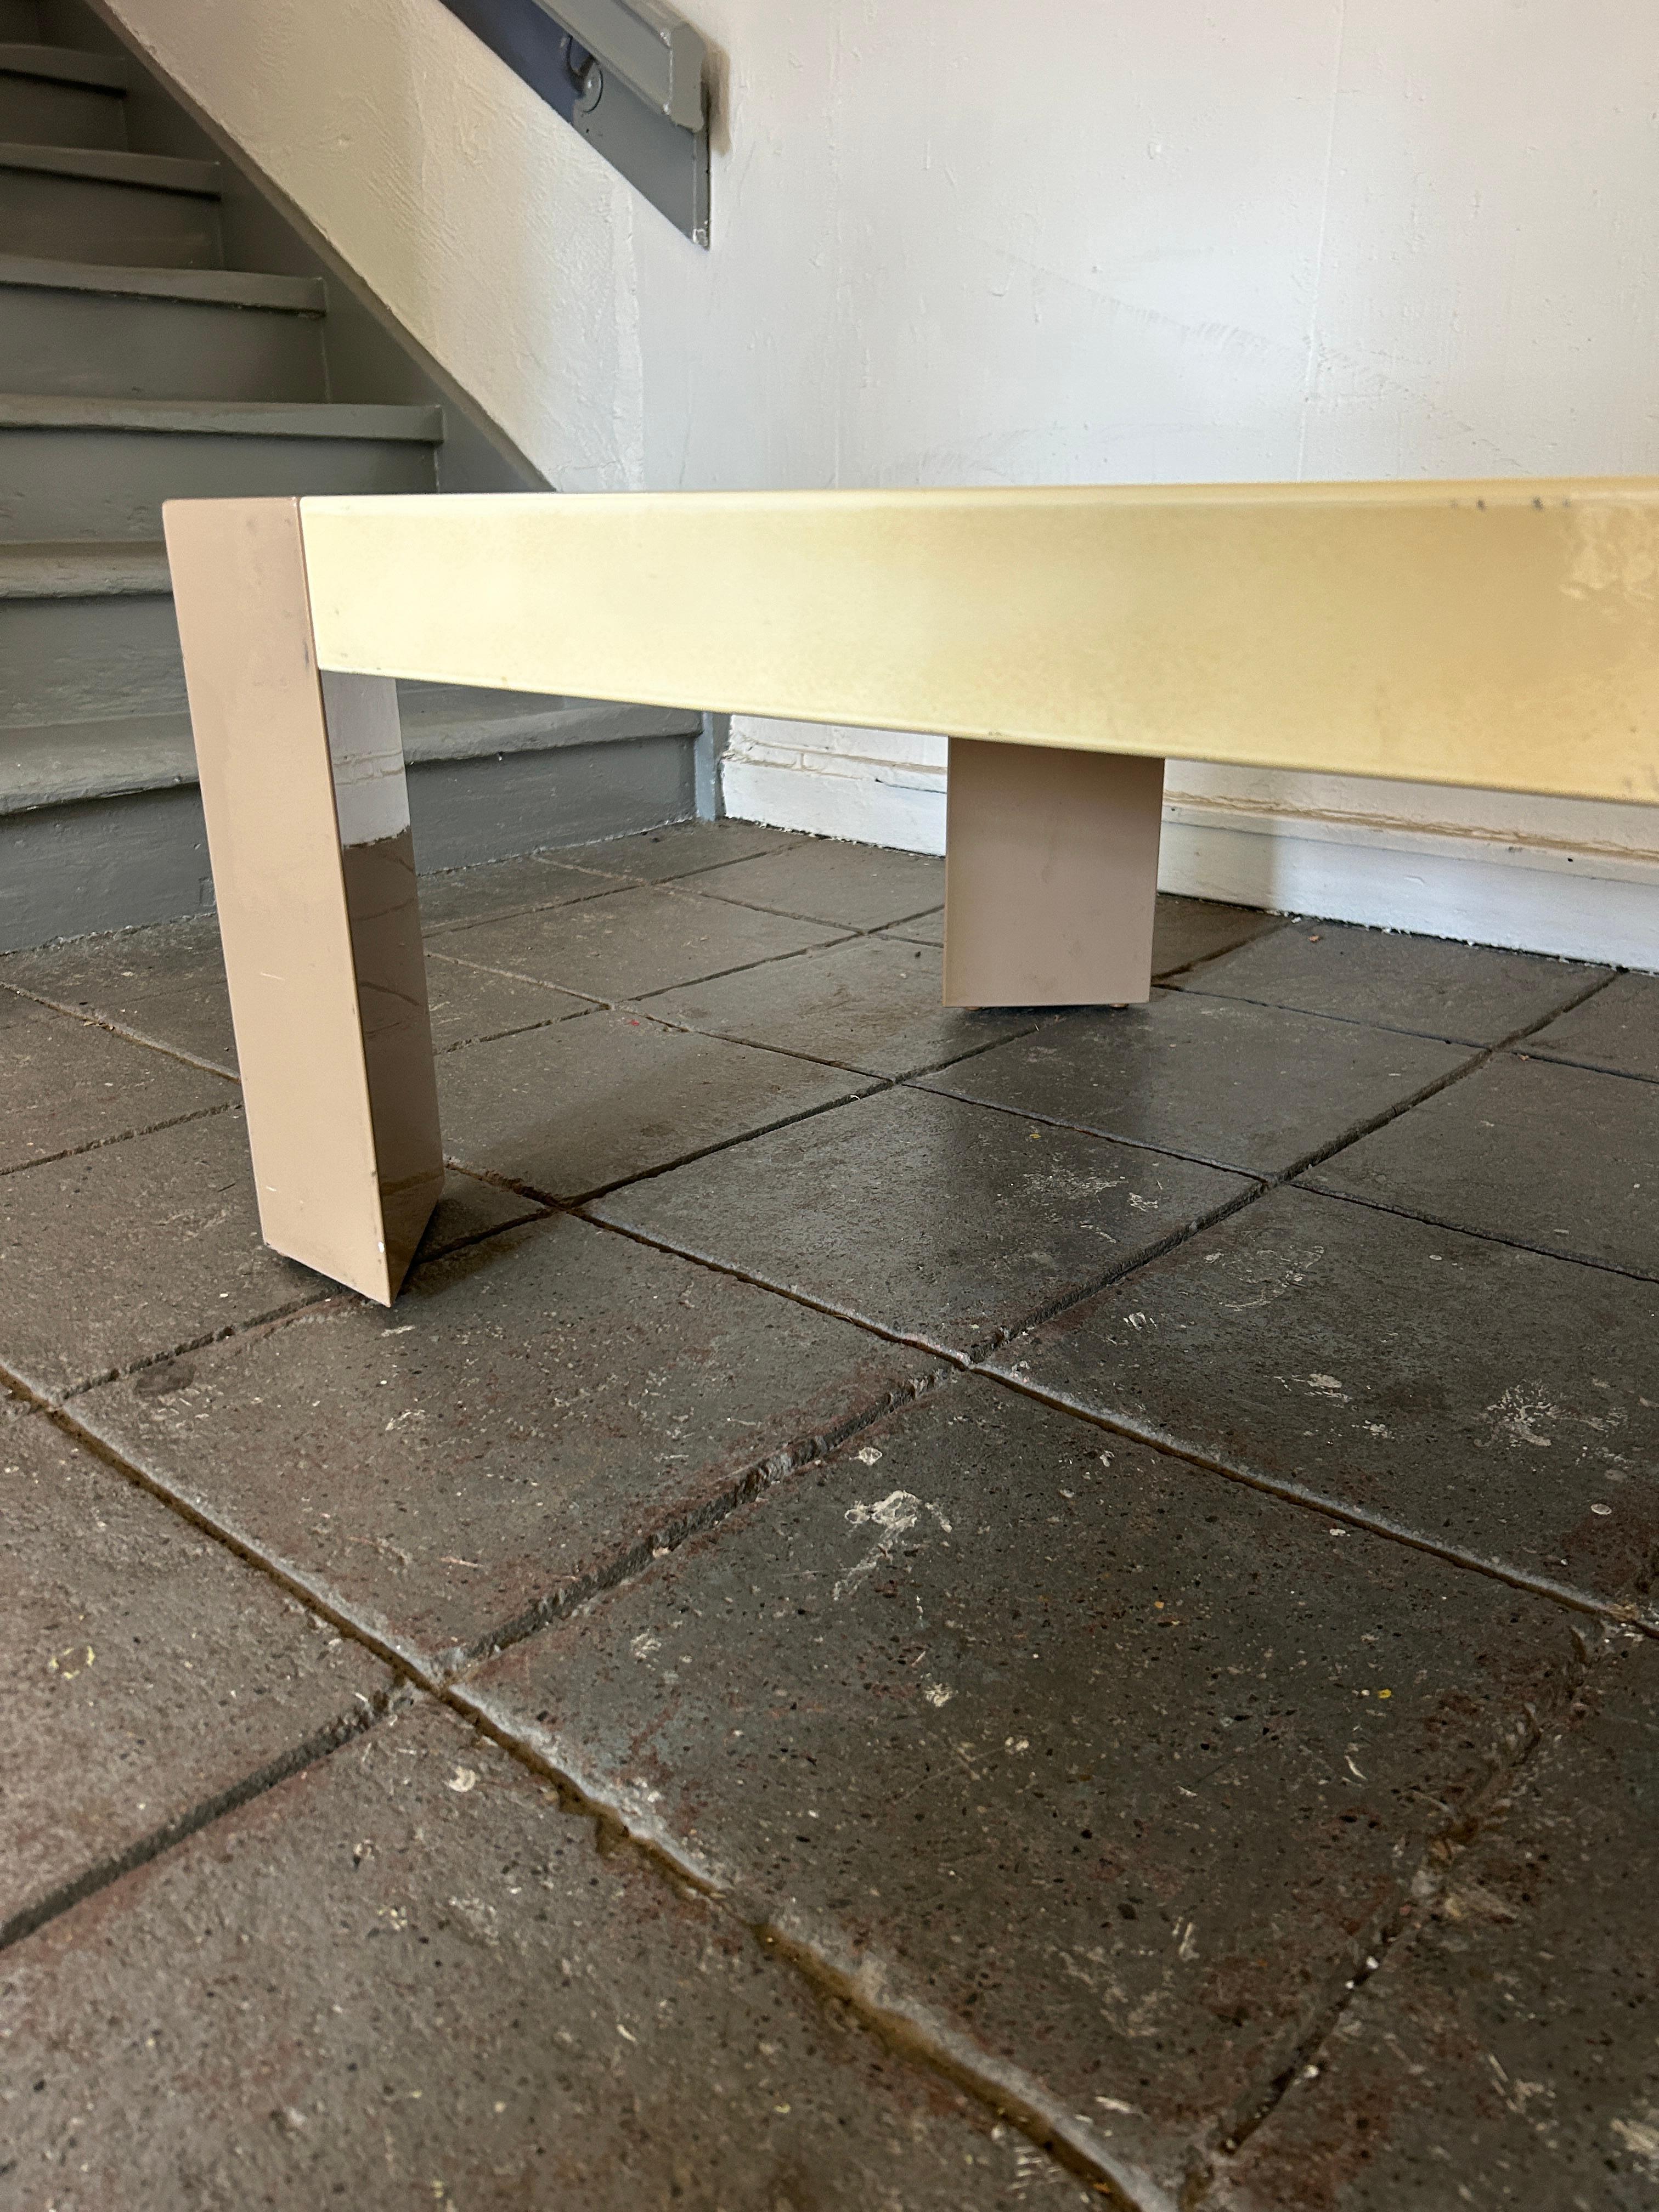 Memphis Milano style 1980s high gloss 2 tone lacquer coffee table. Rectangle table with triangle legs. Light brown legs with off white cream table top. No label or Mfg. Post-modern circa 1980. Located in Brooklyn NYC.

Table measures 48” x 30” x